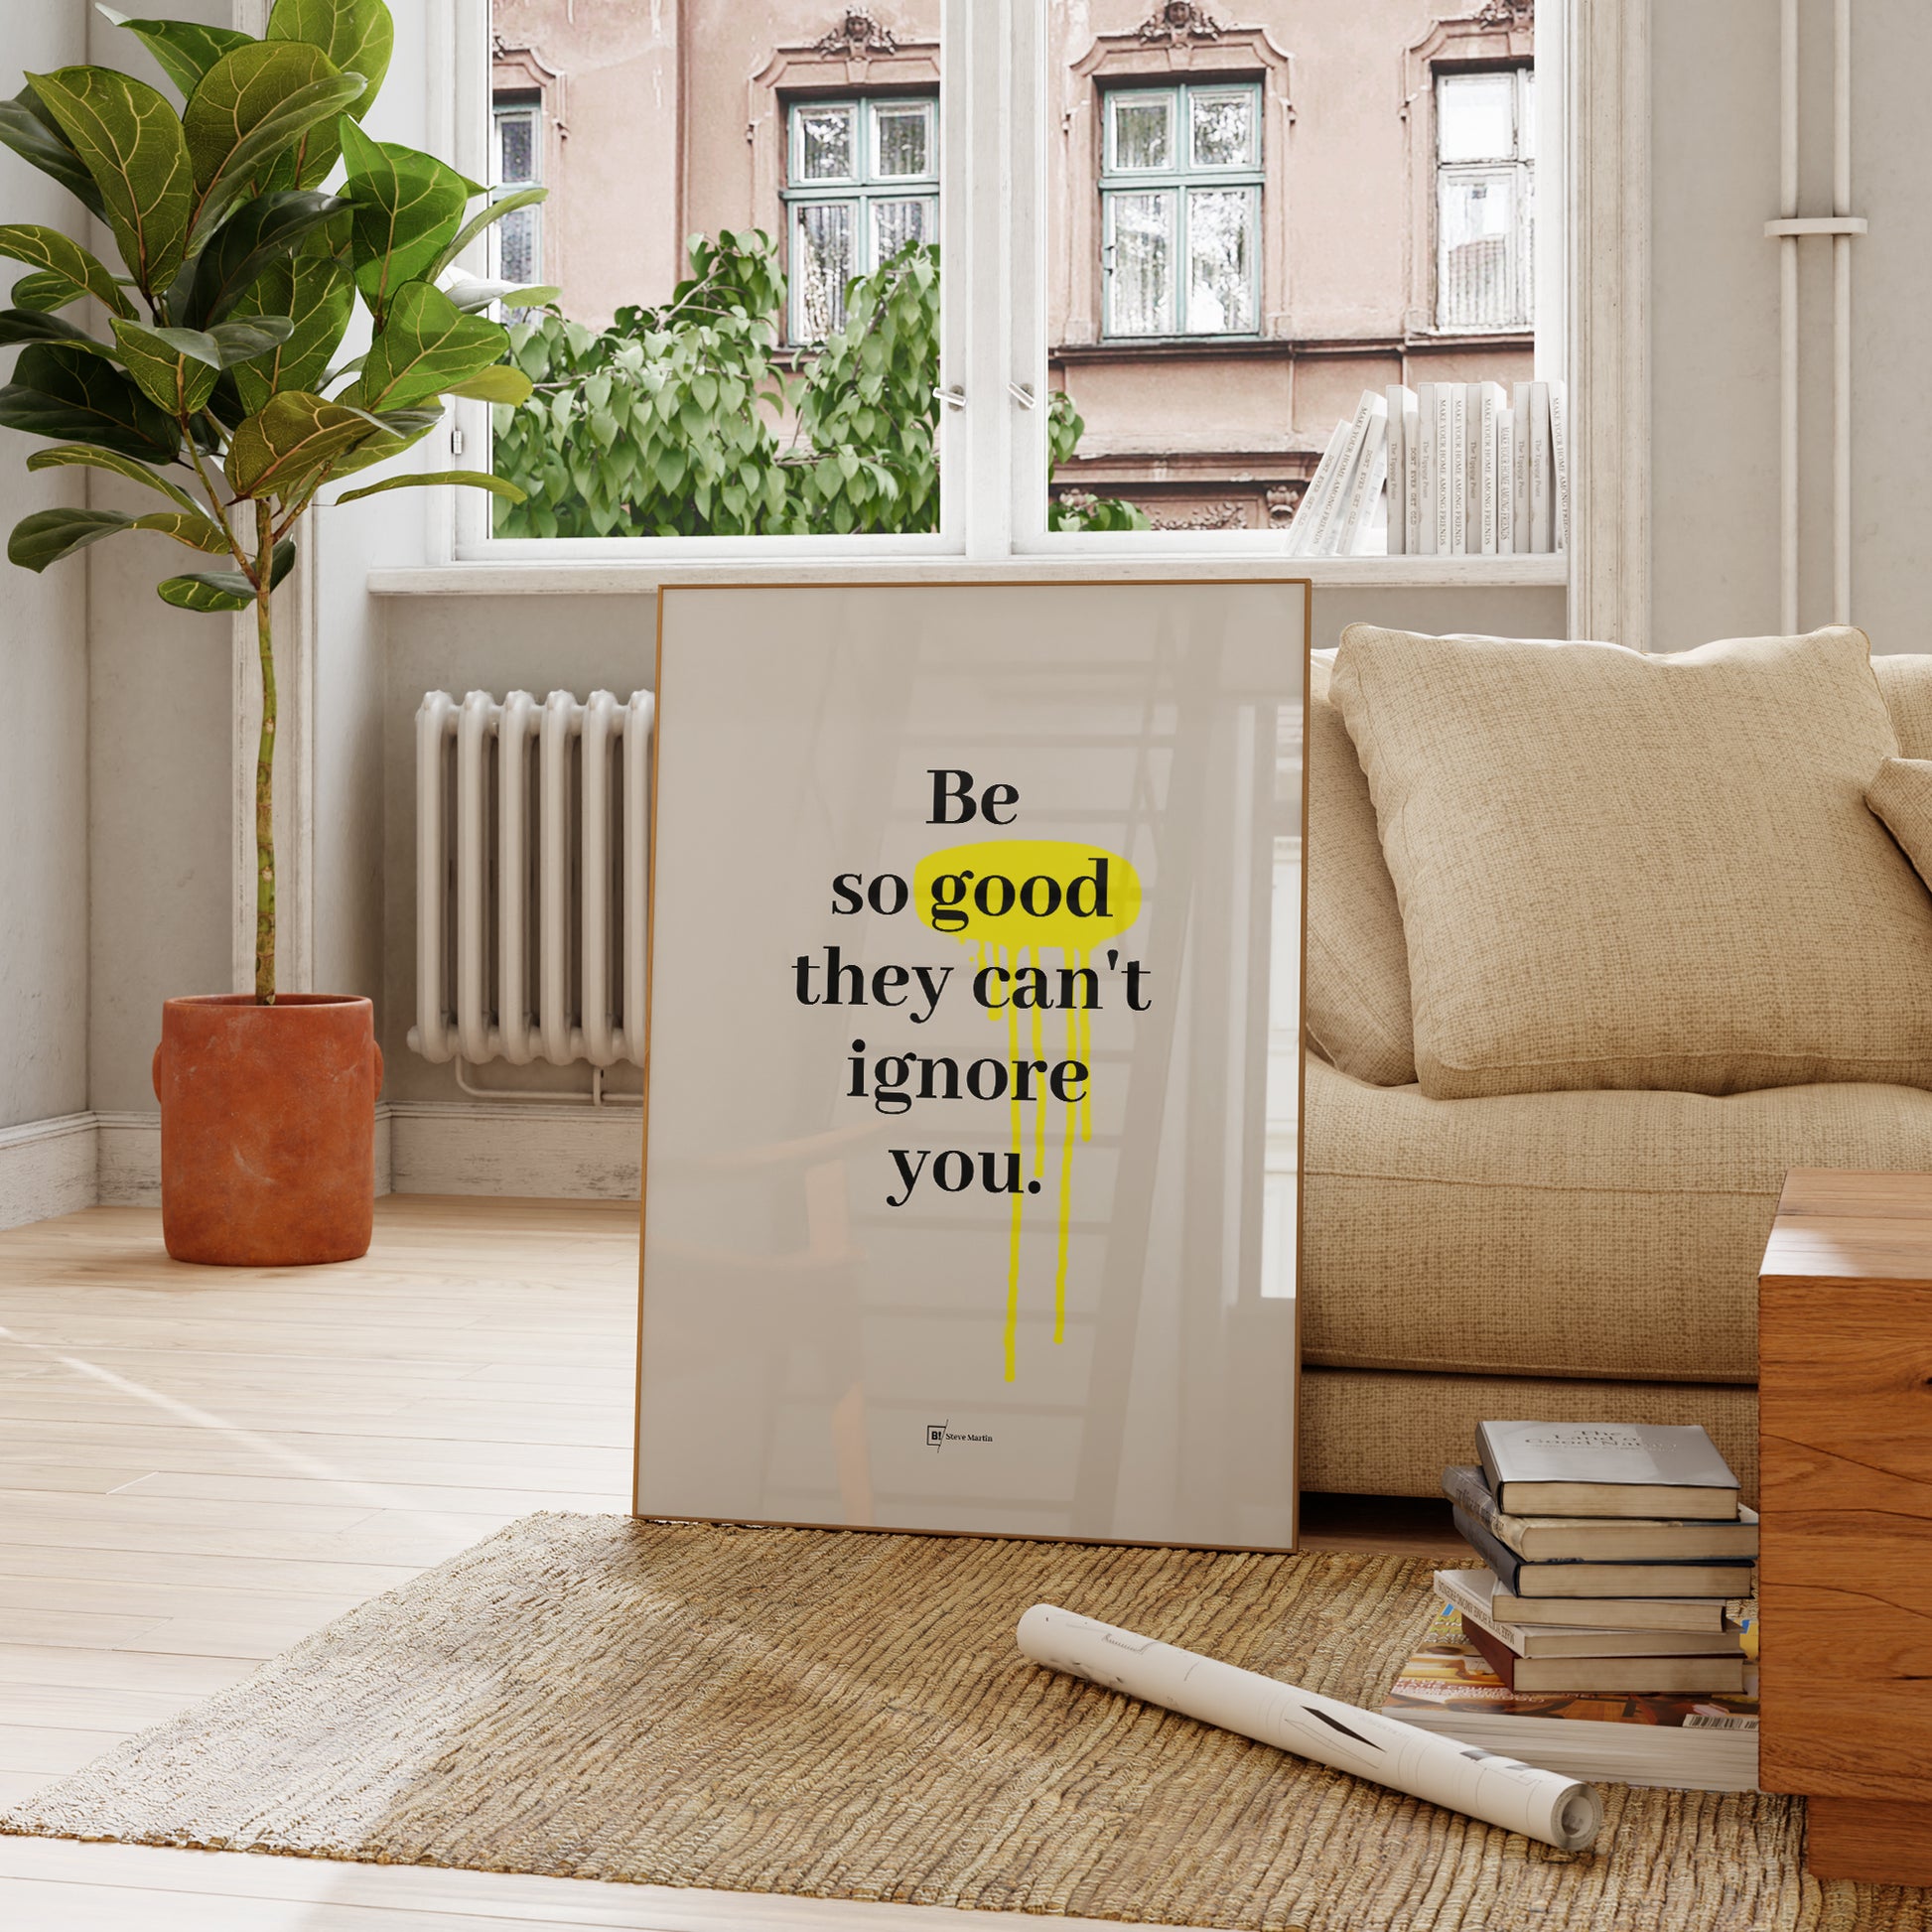 Be inspired by Steve Martin's famous "Be so good they can't ignore you" quote art print. This artwork was printed using the giclée process on archival acid-free paper and is presented in a french living room that captures its timeless beauty in every detail.